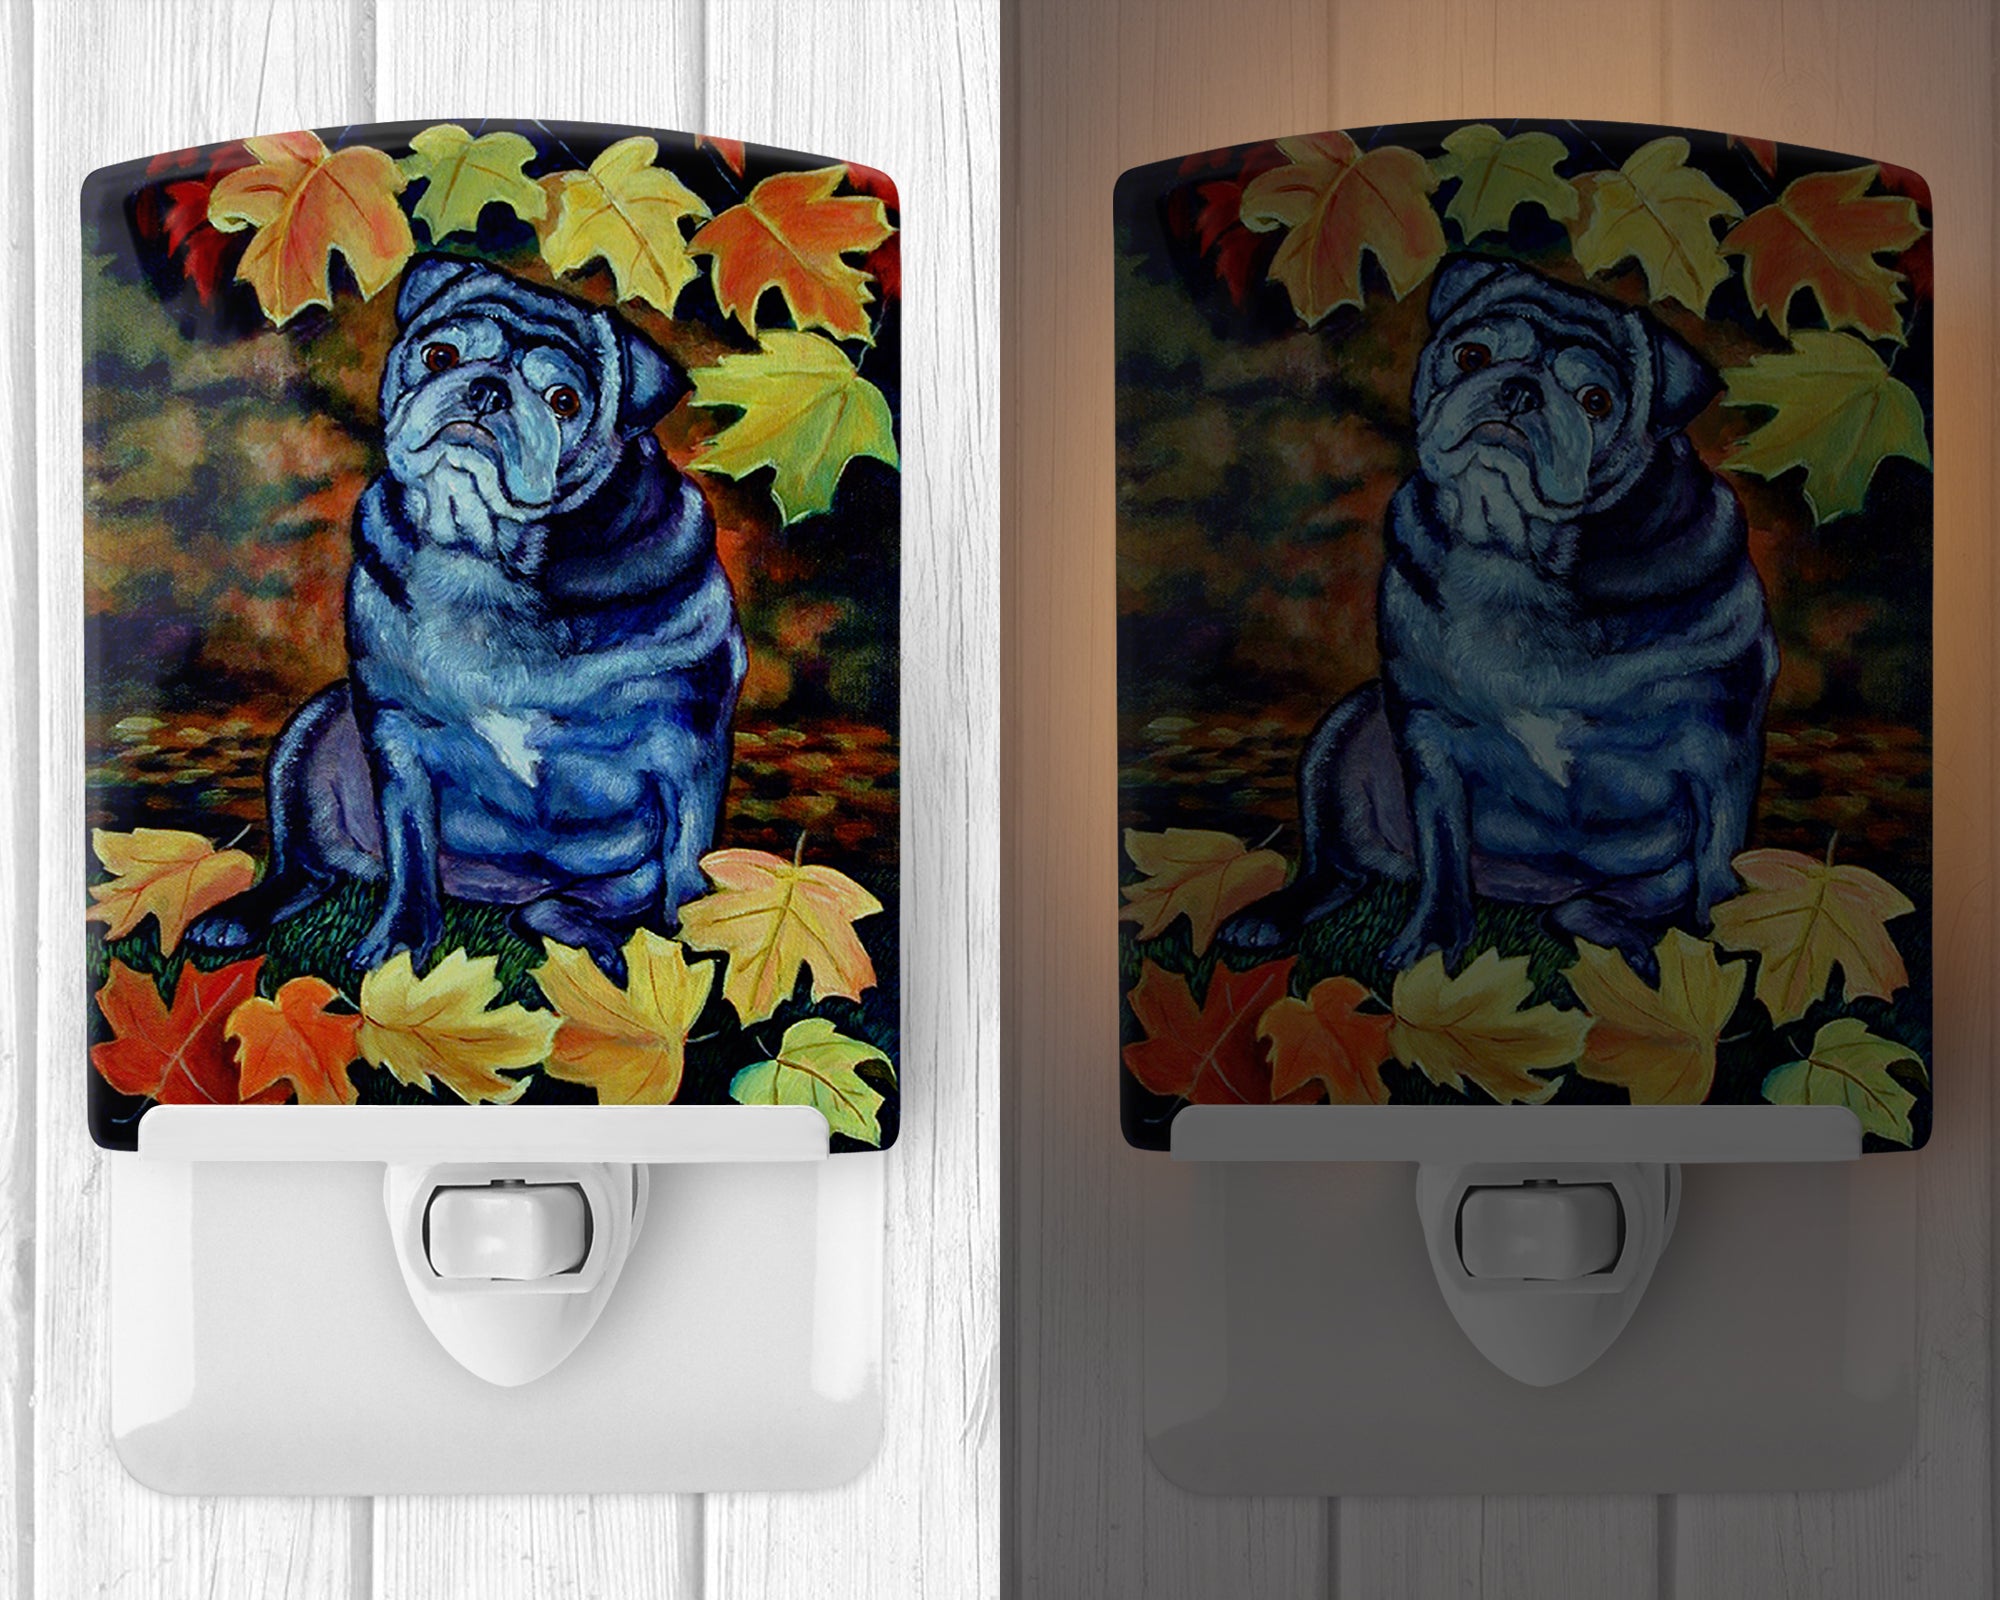 Old Black Pug in Fall Leaves Ceramic Night Light 7159CNL - the-store.com